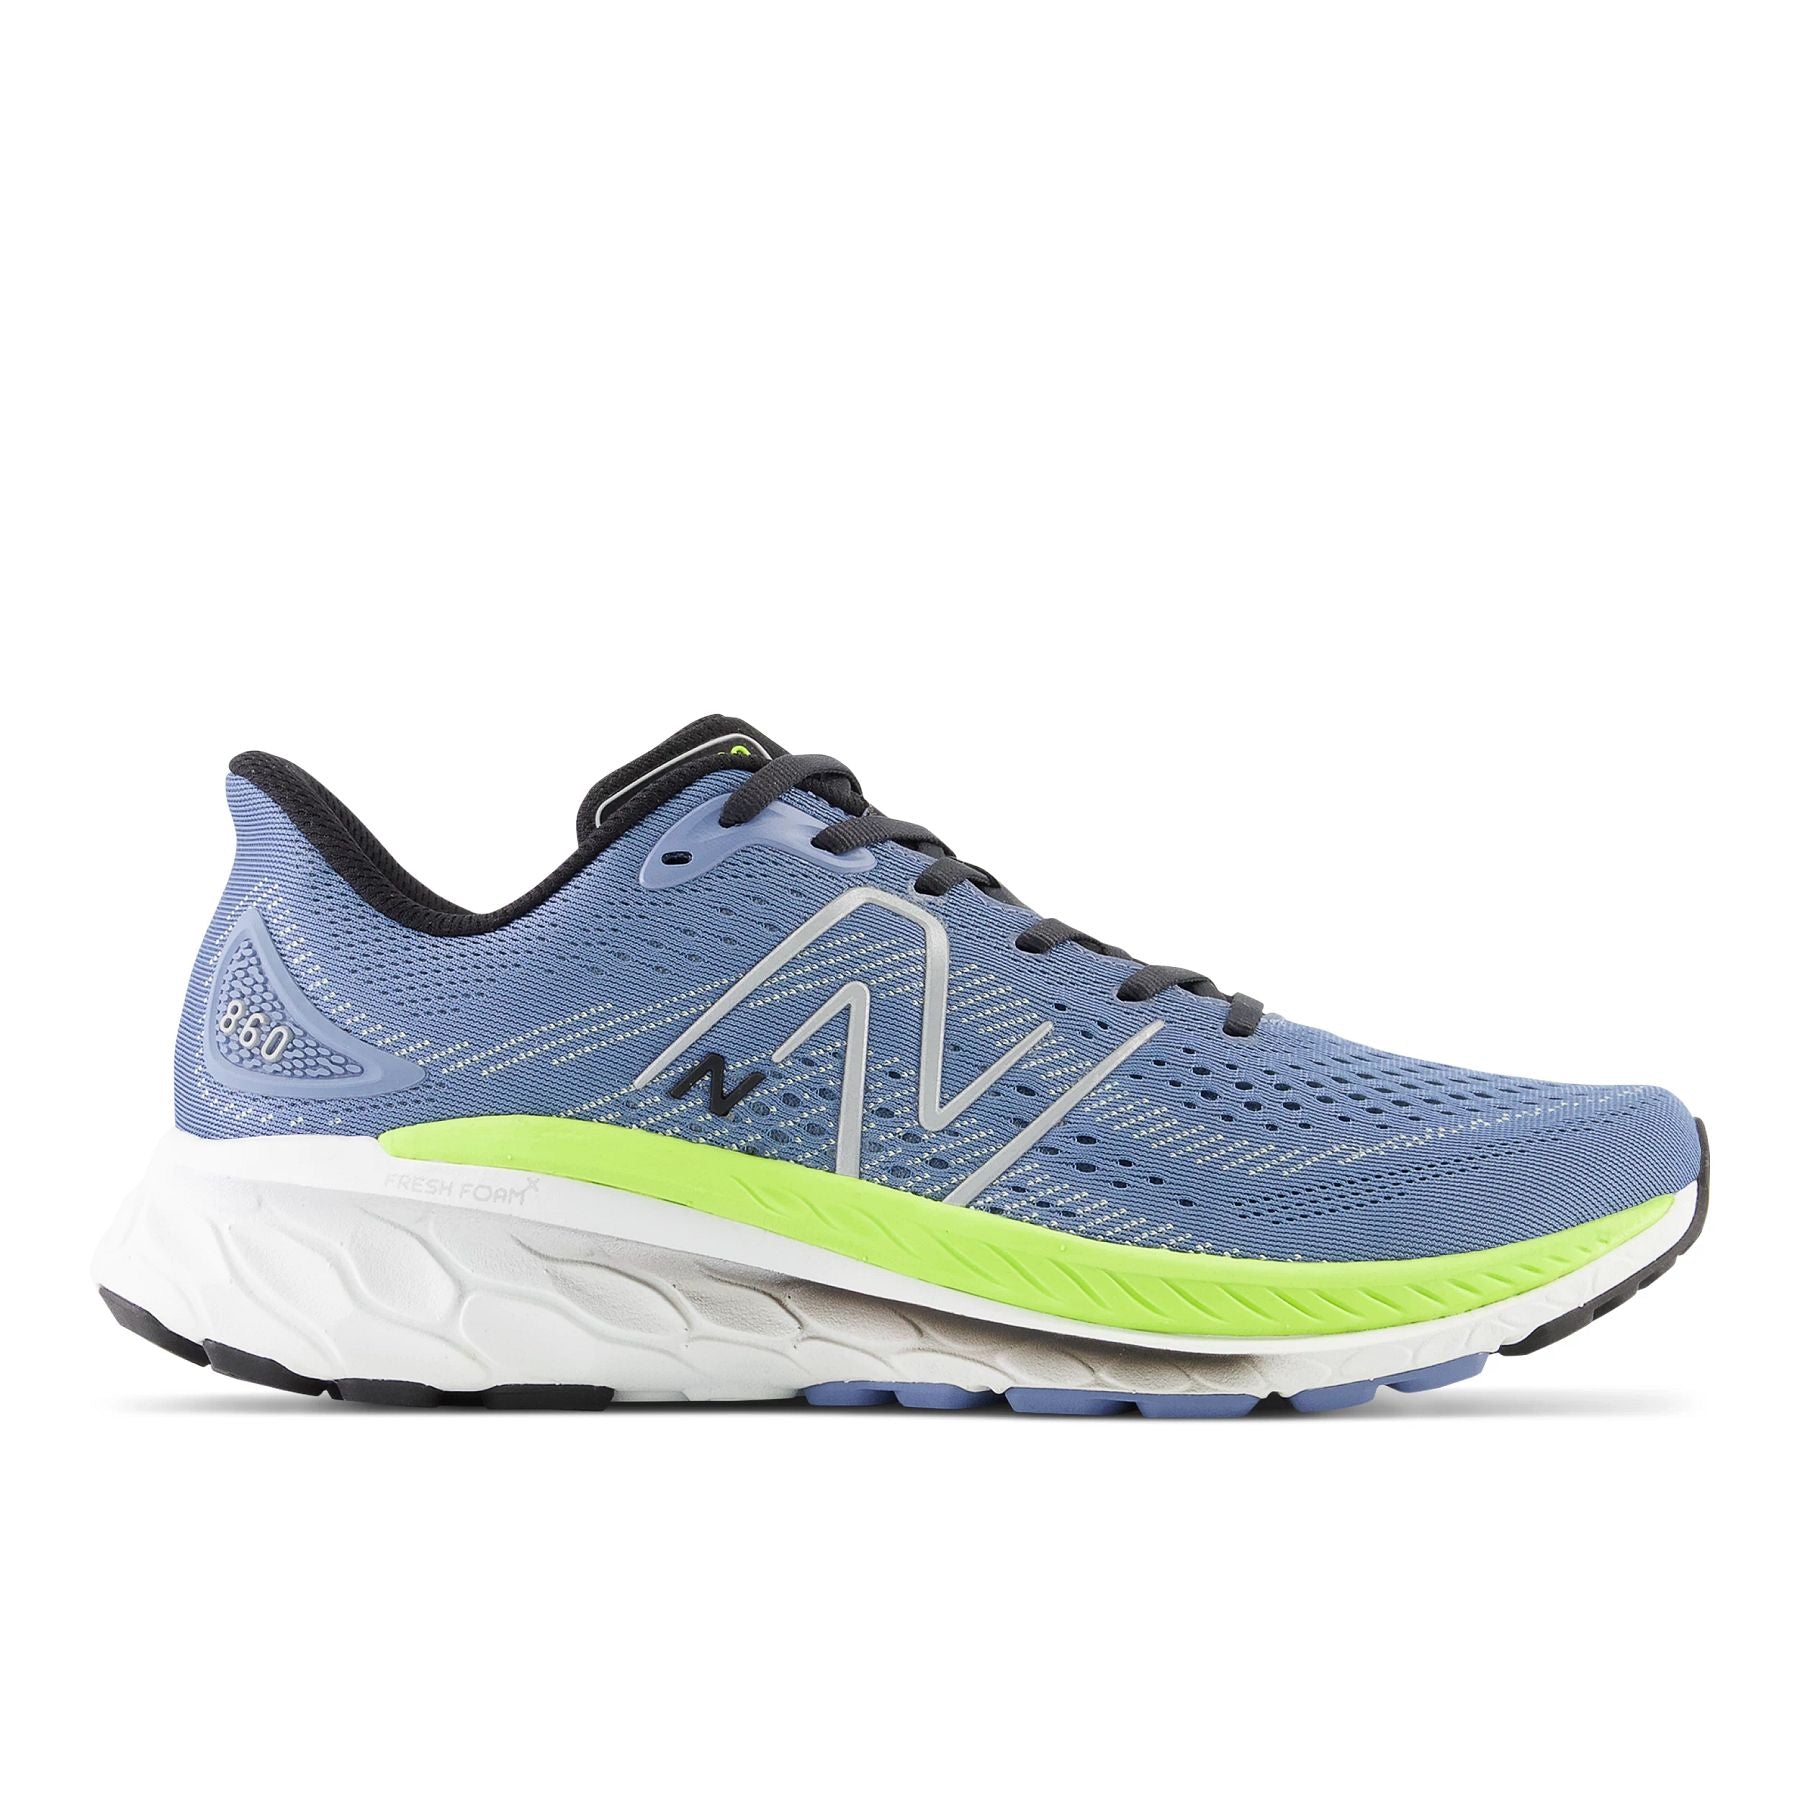 Lateral view of the Men's 860 V13 by New Balance in the color Mercury Blue/Thirty Watt